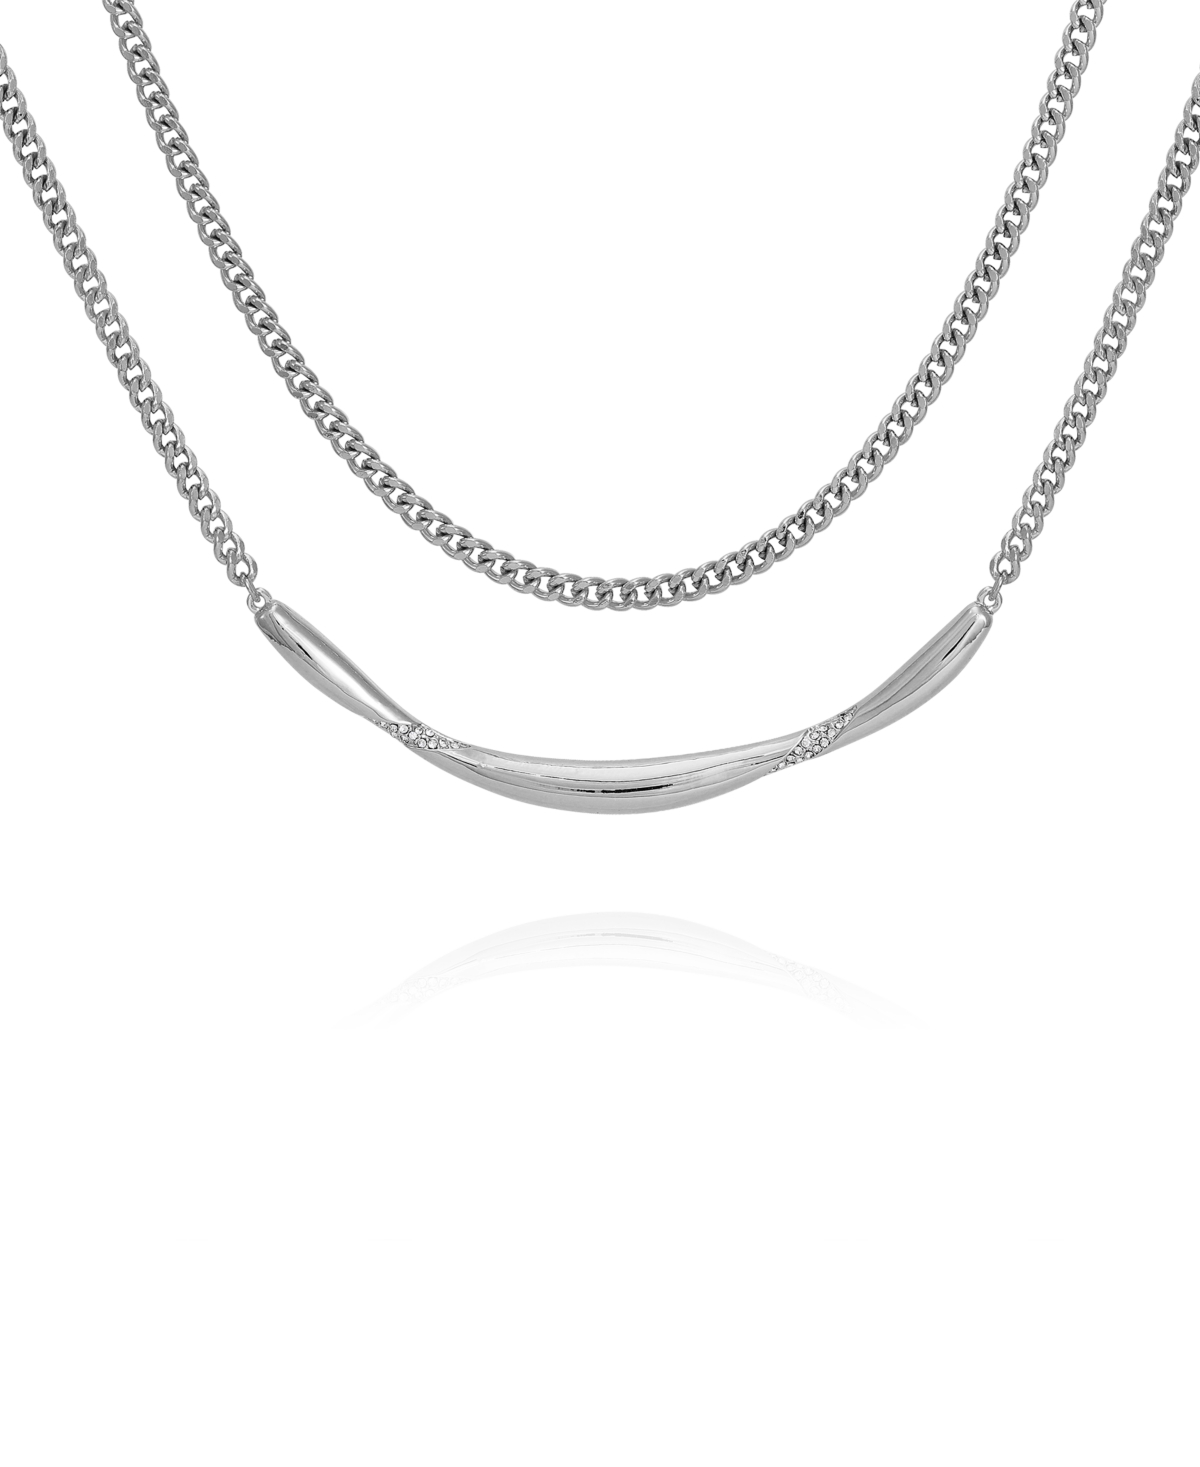 Vince Camuto Silver-tone Layered Curb Chain Necklace, 18" + 2" Extender